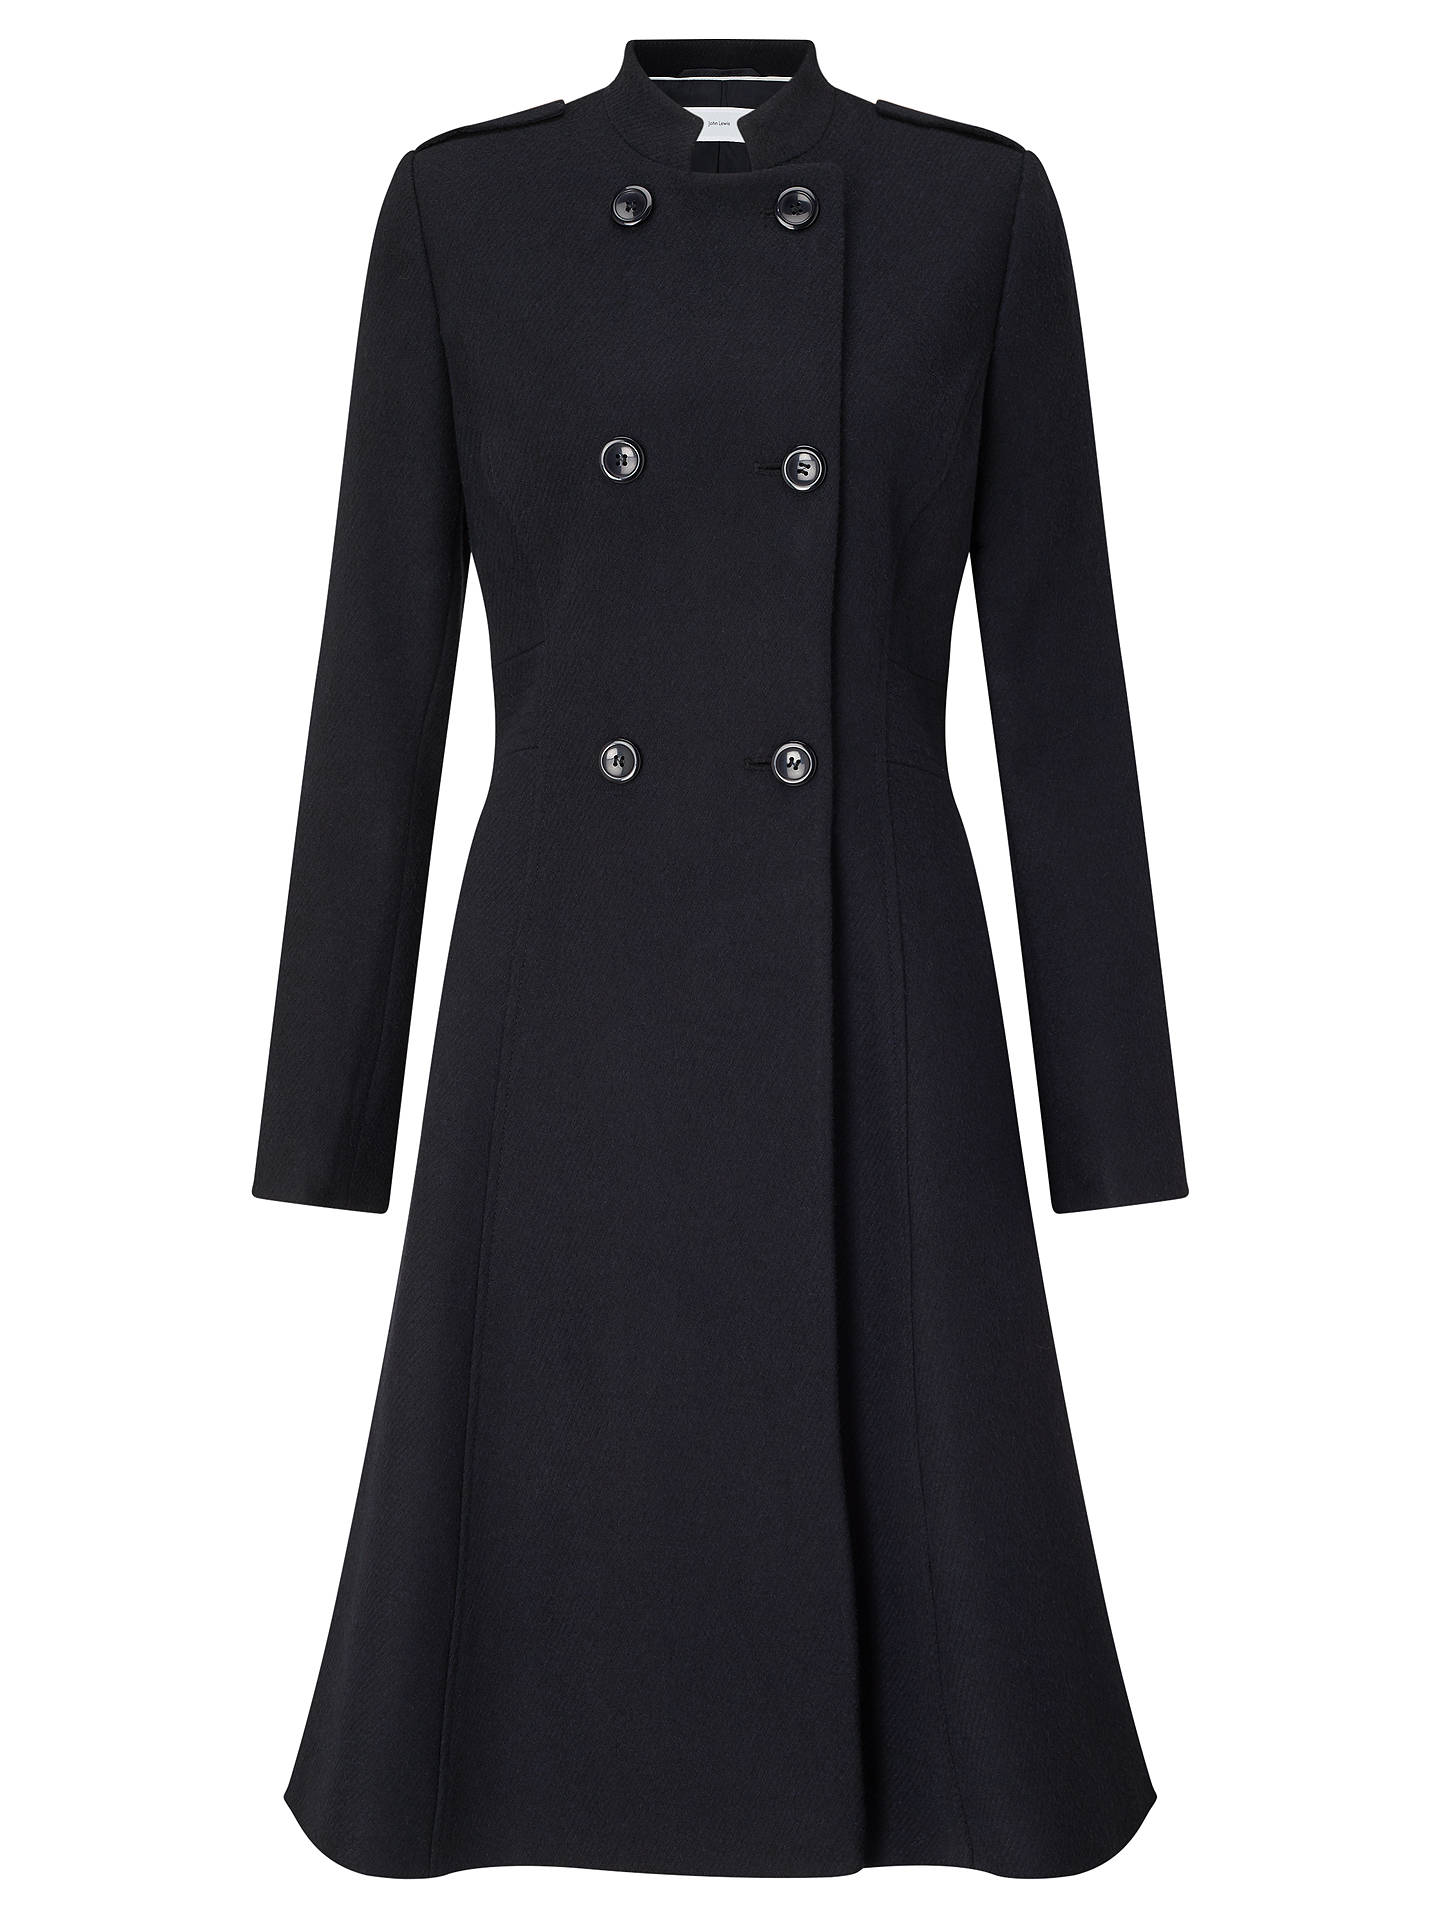 John Lewis Military Fit and Flare Coat at John Lewis & Partners